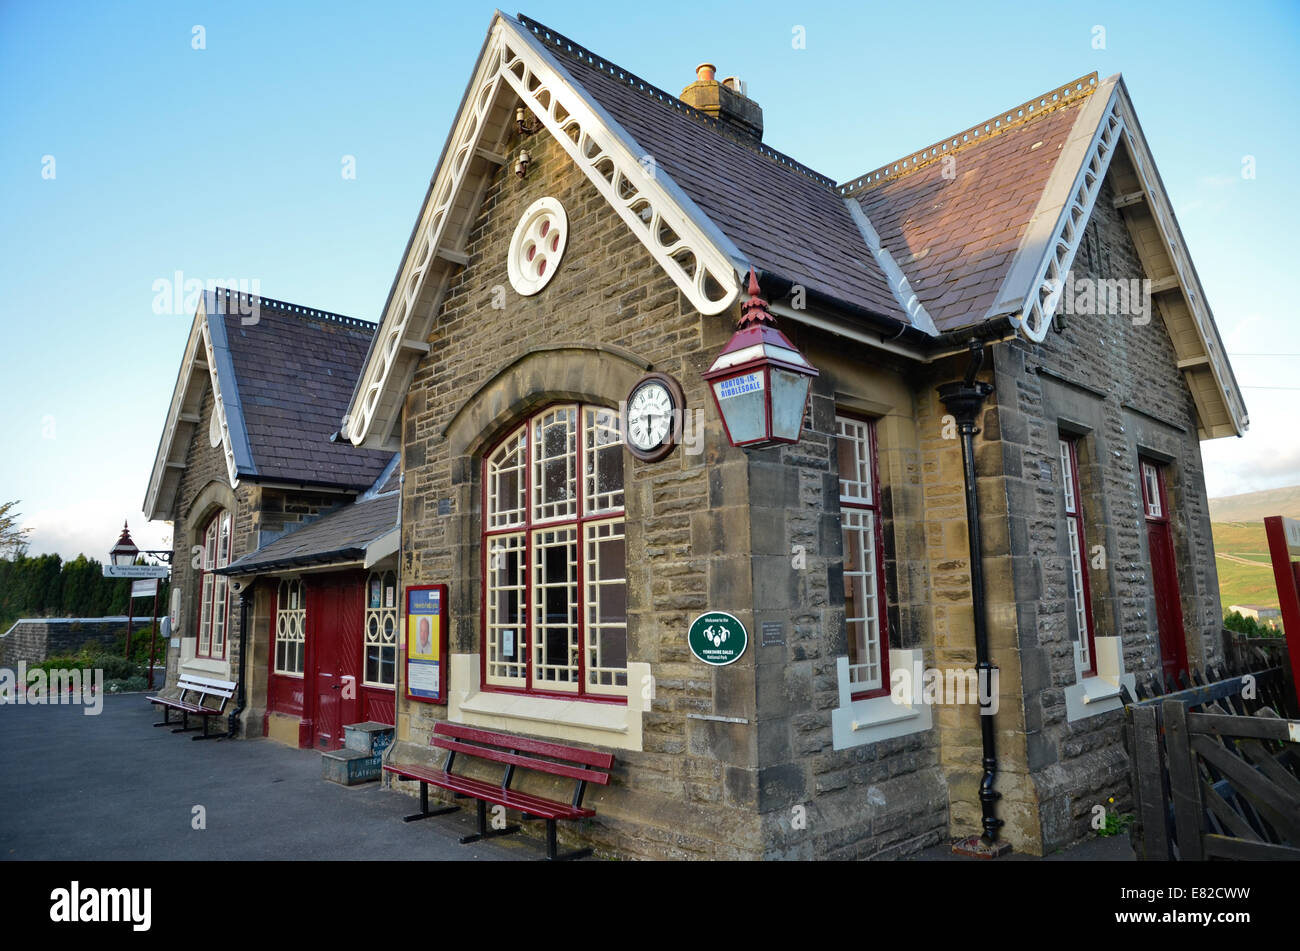 Horton in Ribblesdale railway station in the Yorkshire Dales. It is one of the stations on the Carlisle to Settle railway line. Stock Photo